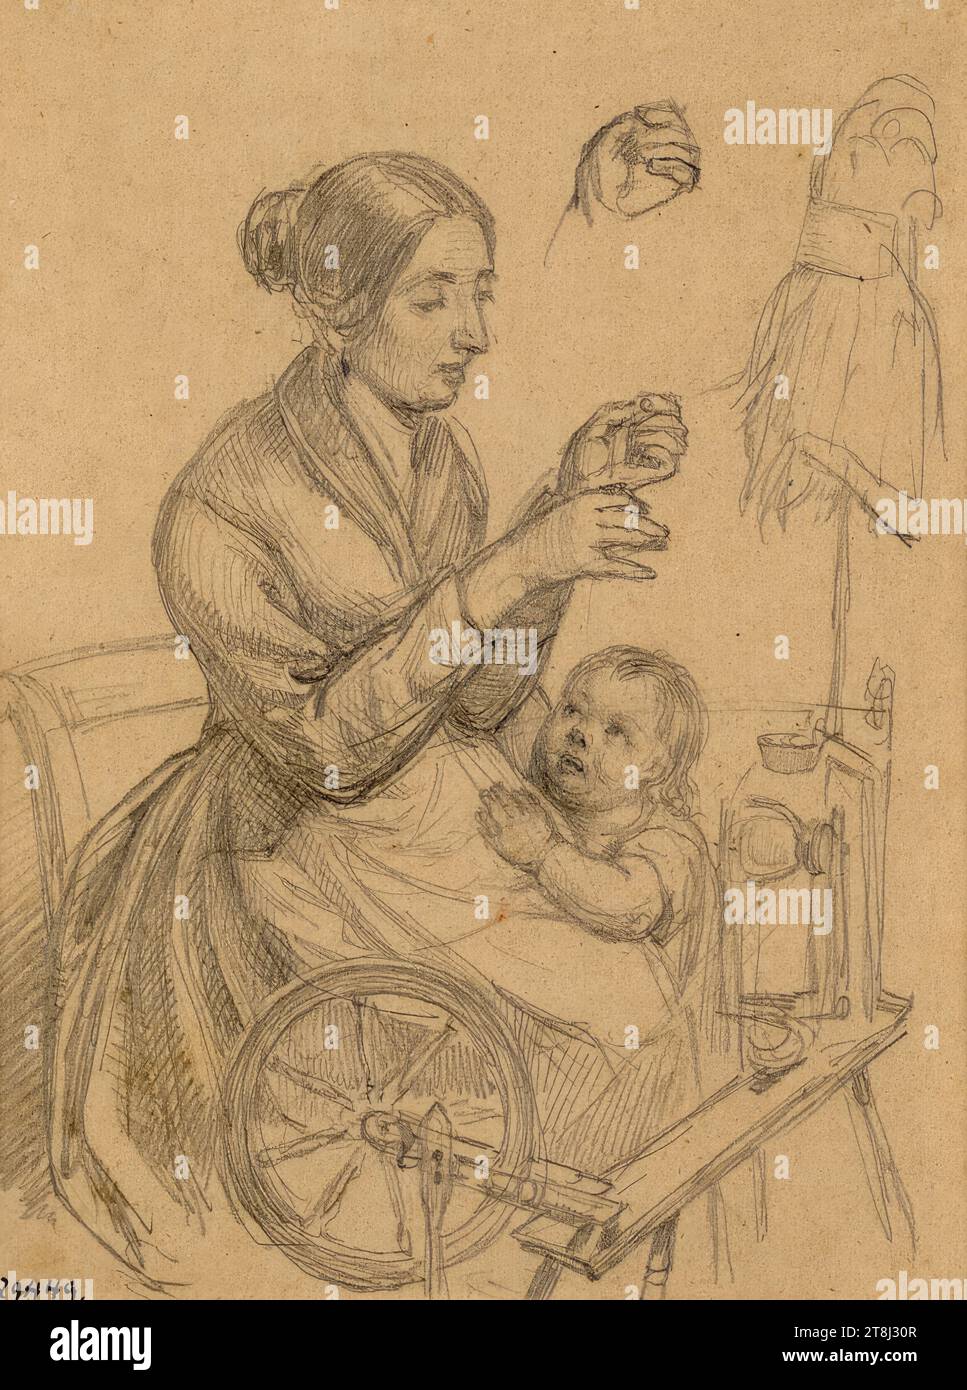 Woman with child at the spinning wheel, Christian Friedrich Gille, Ballenstedt 1805 - 1899 Wahnsdorf, 1840-1850, drawing, pencil, on reddish paper, 182 x 138 mm Stock Photo